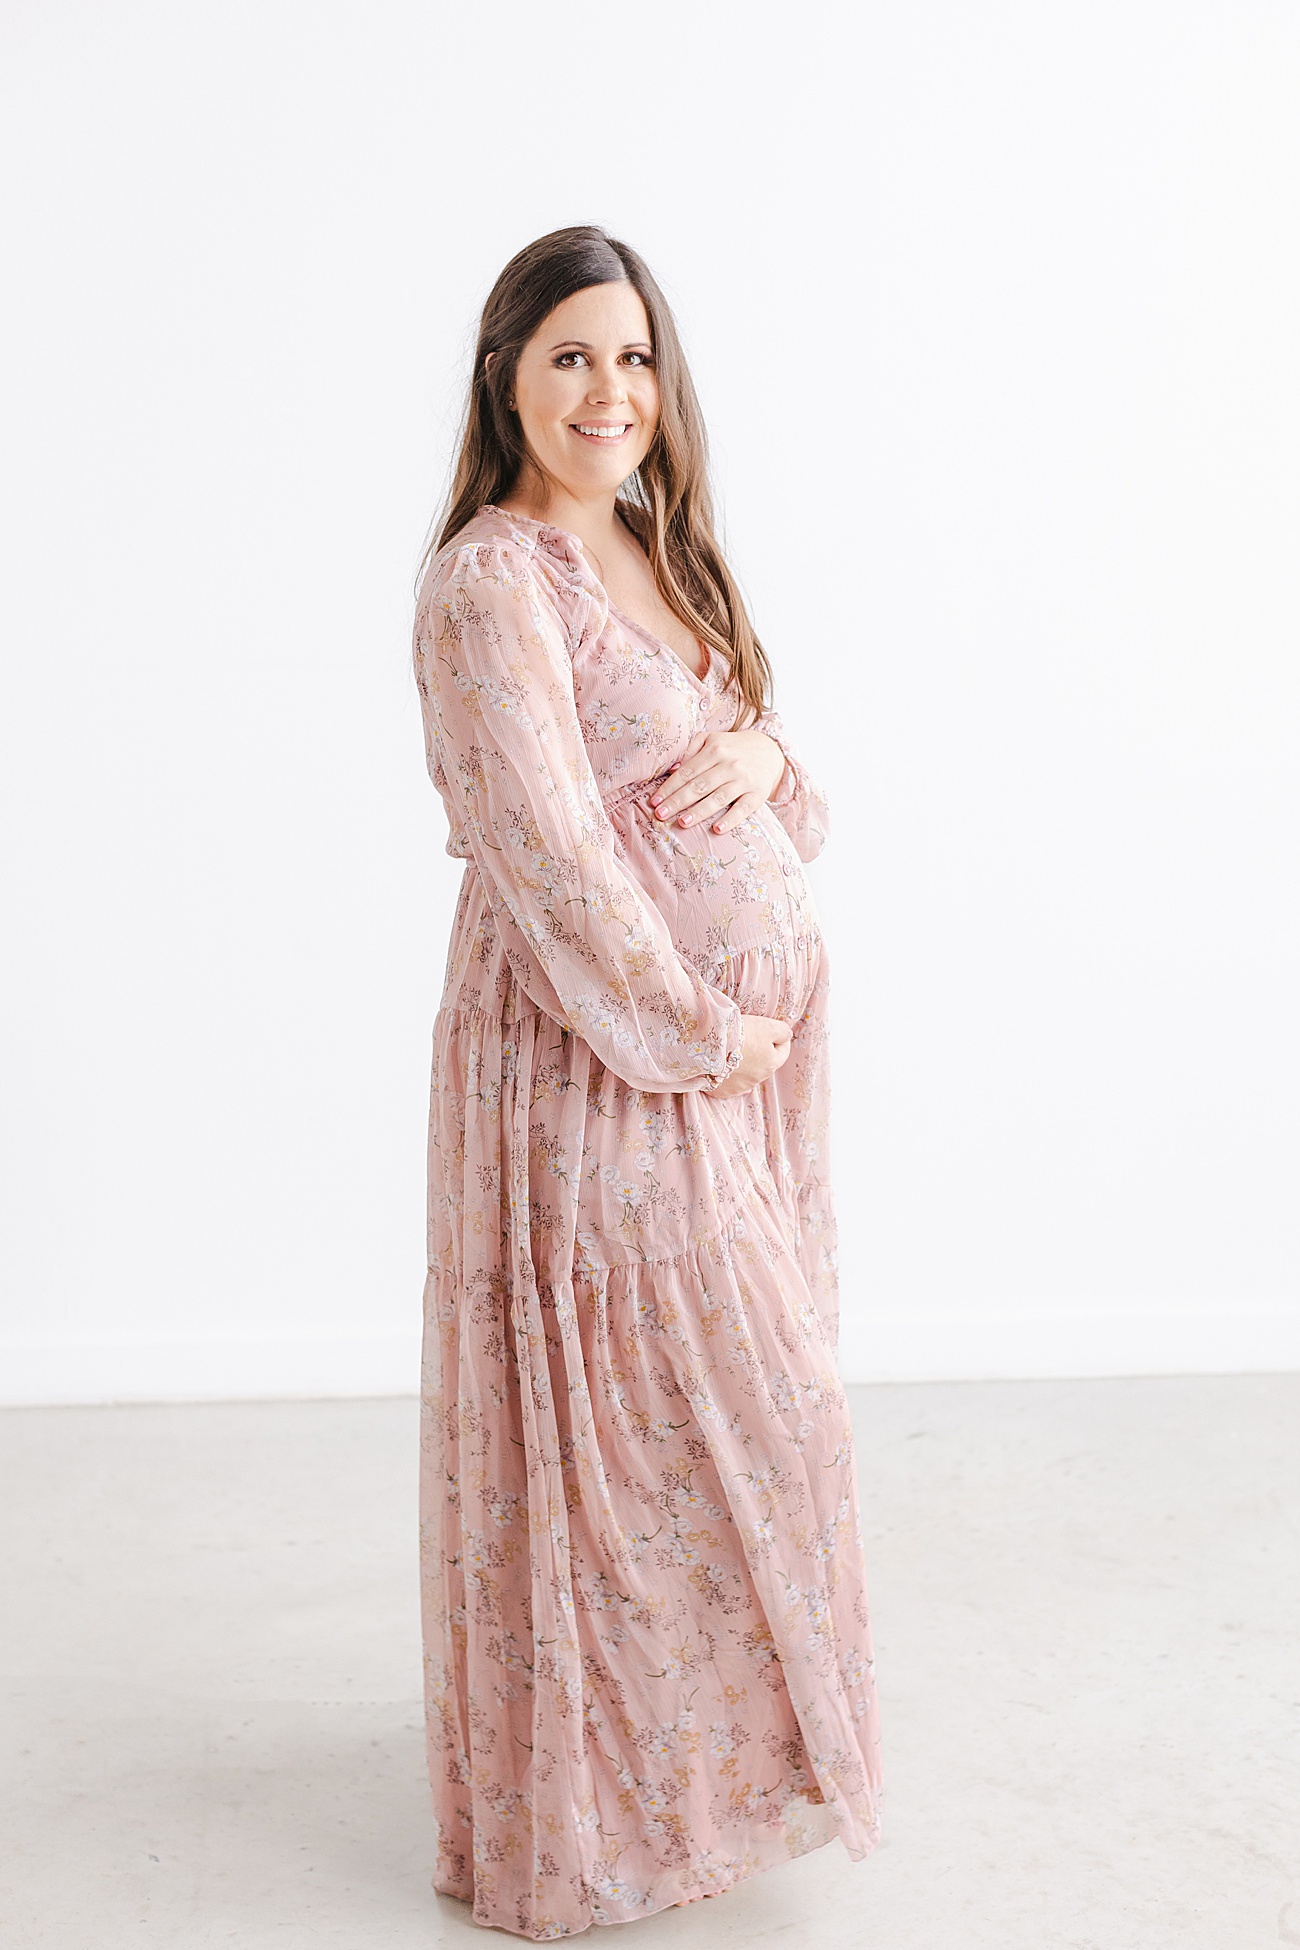 Beautiful Mama-to-be hugging baby bump while wearing pink floral maxi dress. Photo by Sana Ahmed Photography.